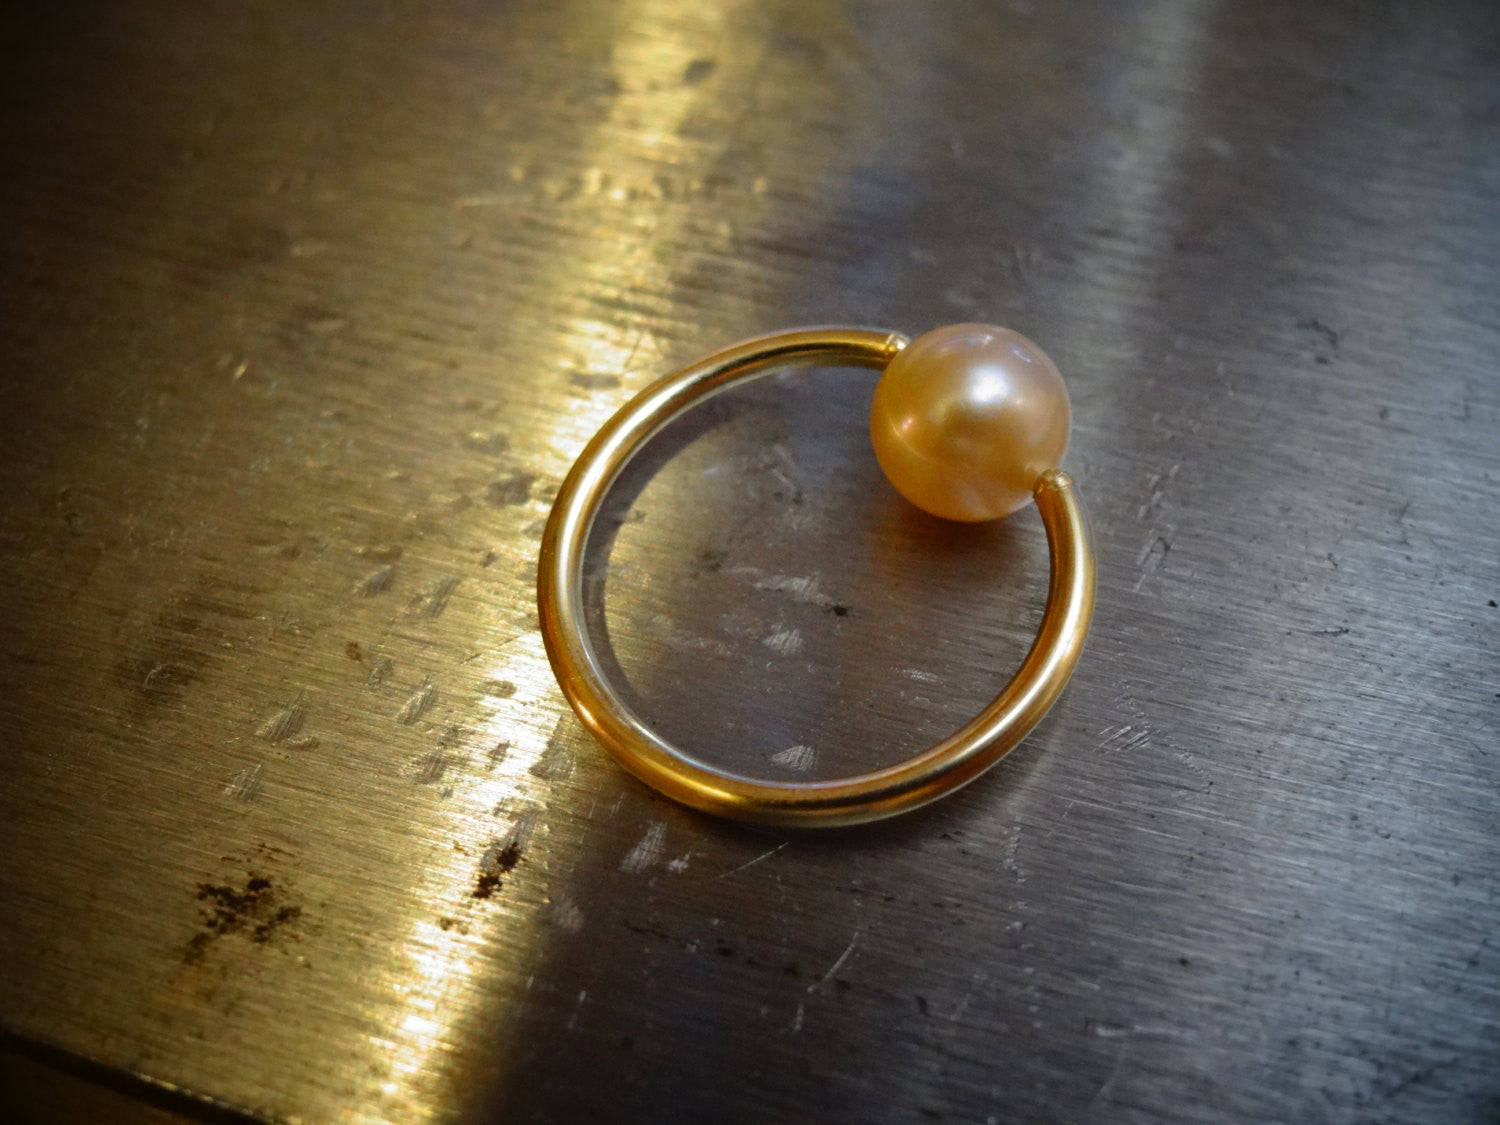 Light Pink Pearl Captive Bead Ring - 14 ga Hoop - 14k Gold (Y, W, or R), Sterling Silver, or Platinum